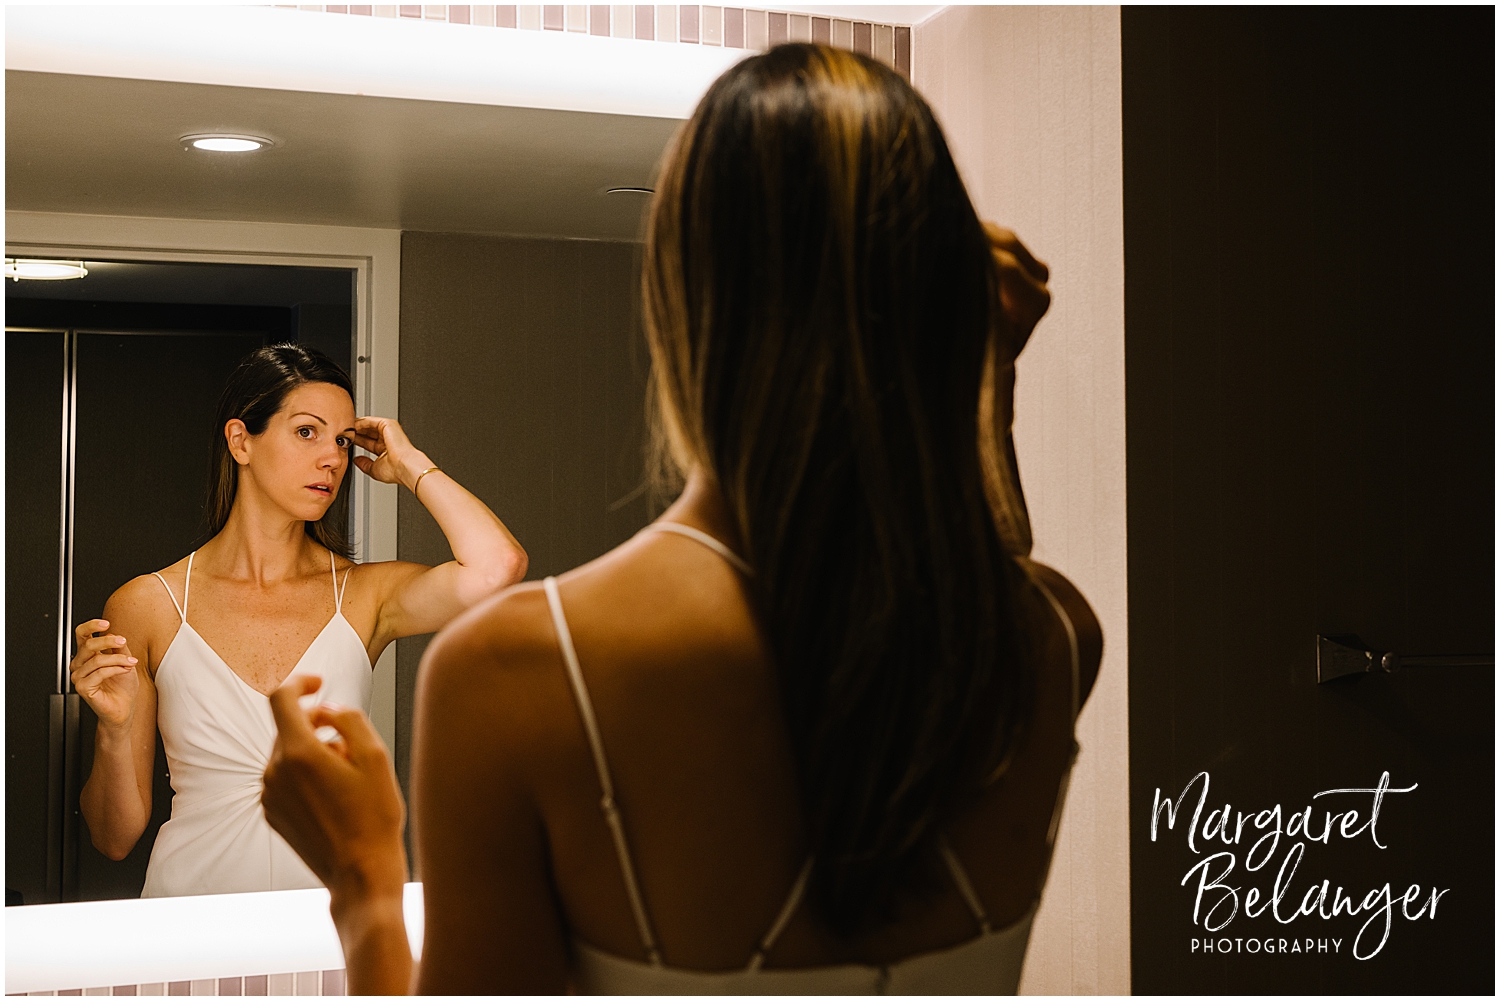 A bride in a white dress looks at her reflection in a mirror, adjusting her hair.